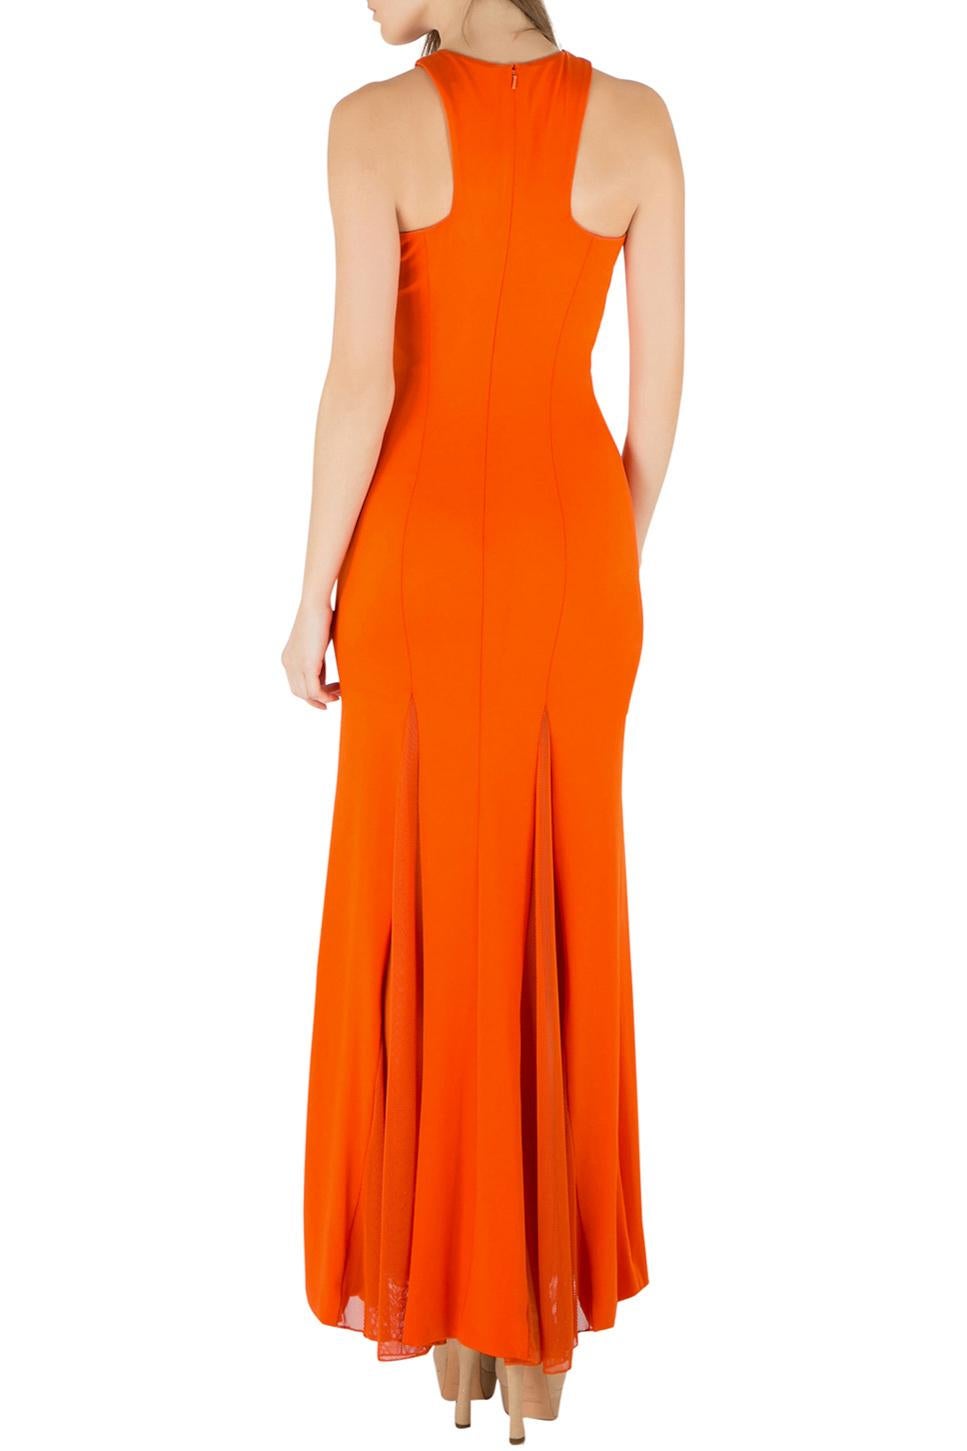 Ditch those traditional mundane dresses and go for a glam, statement-making style with this Cushnie Et Ochs gown. Made from fine quality materials, the gown has mesh panels on the sides, a sleeveless silhouette and a lovely orange hue.

Includes: